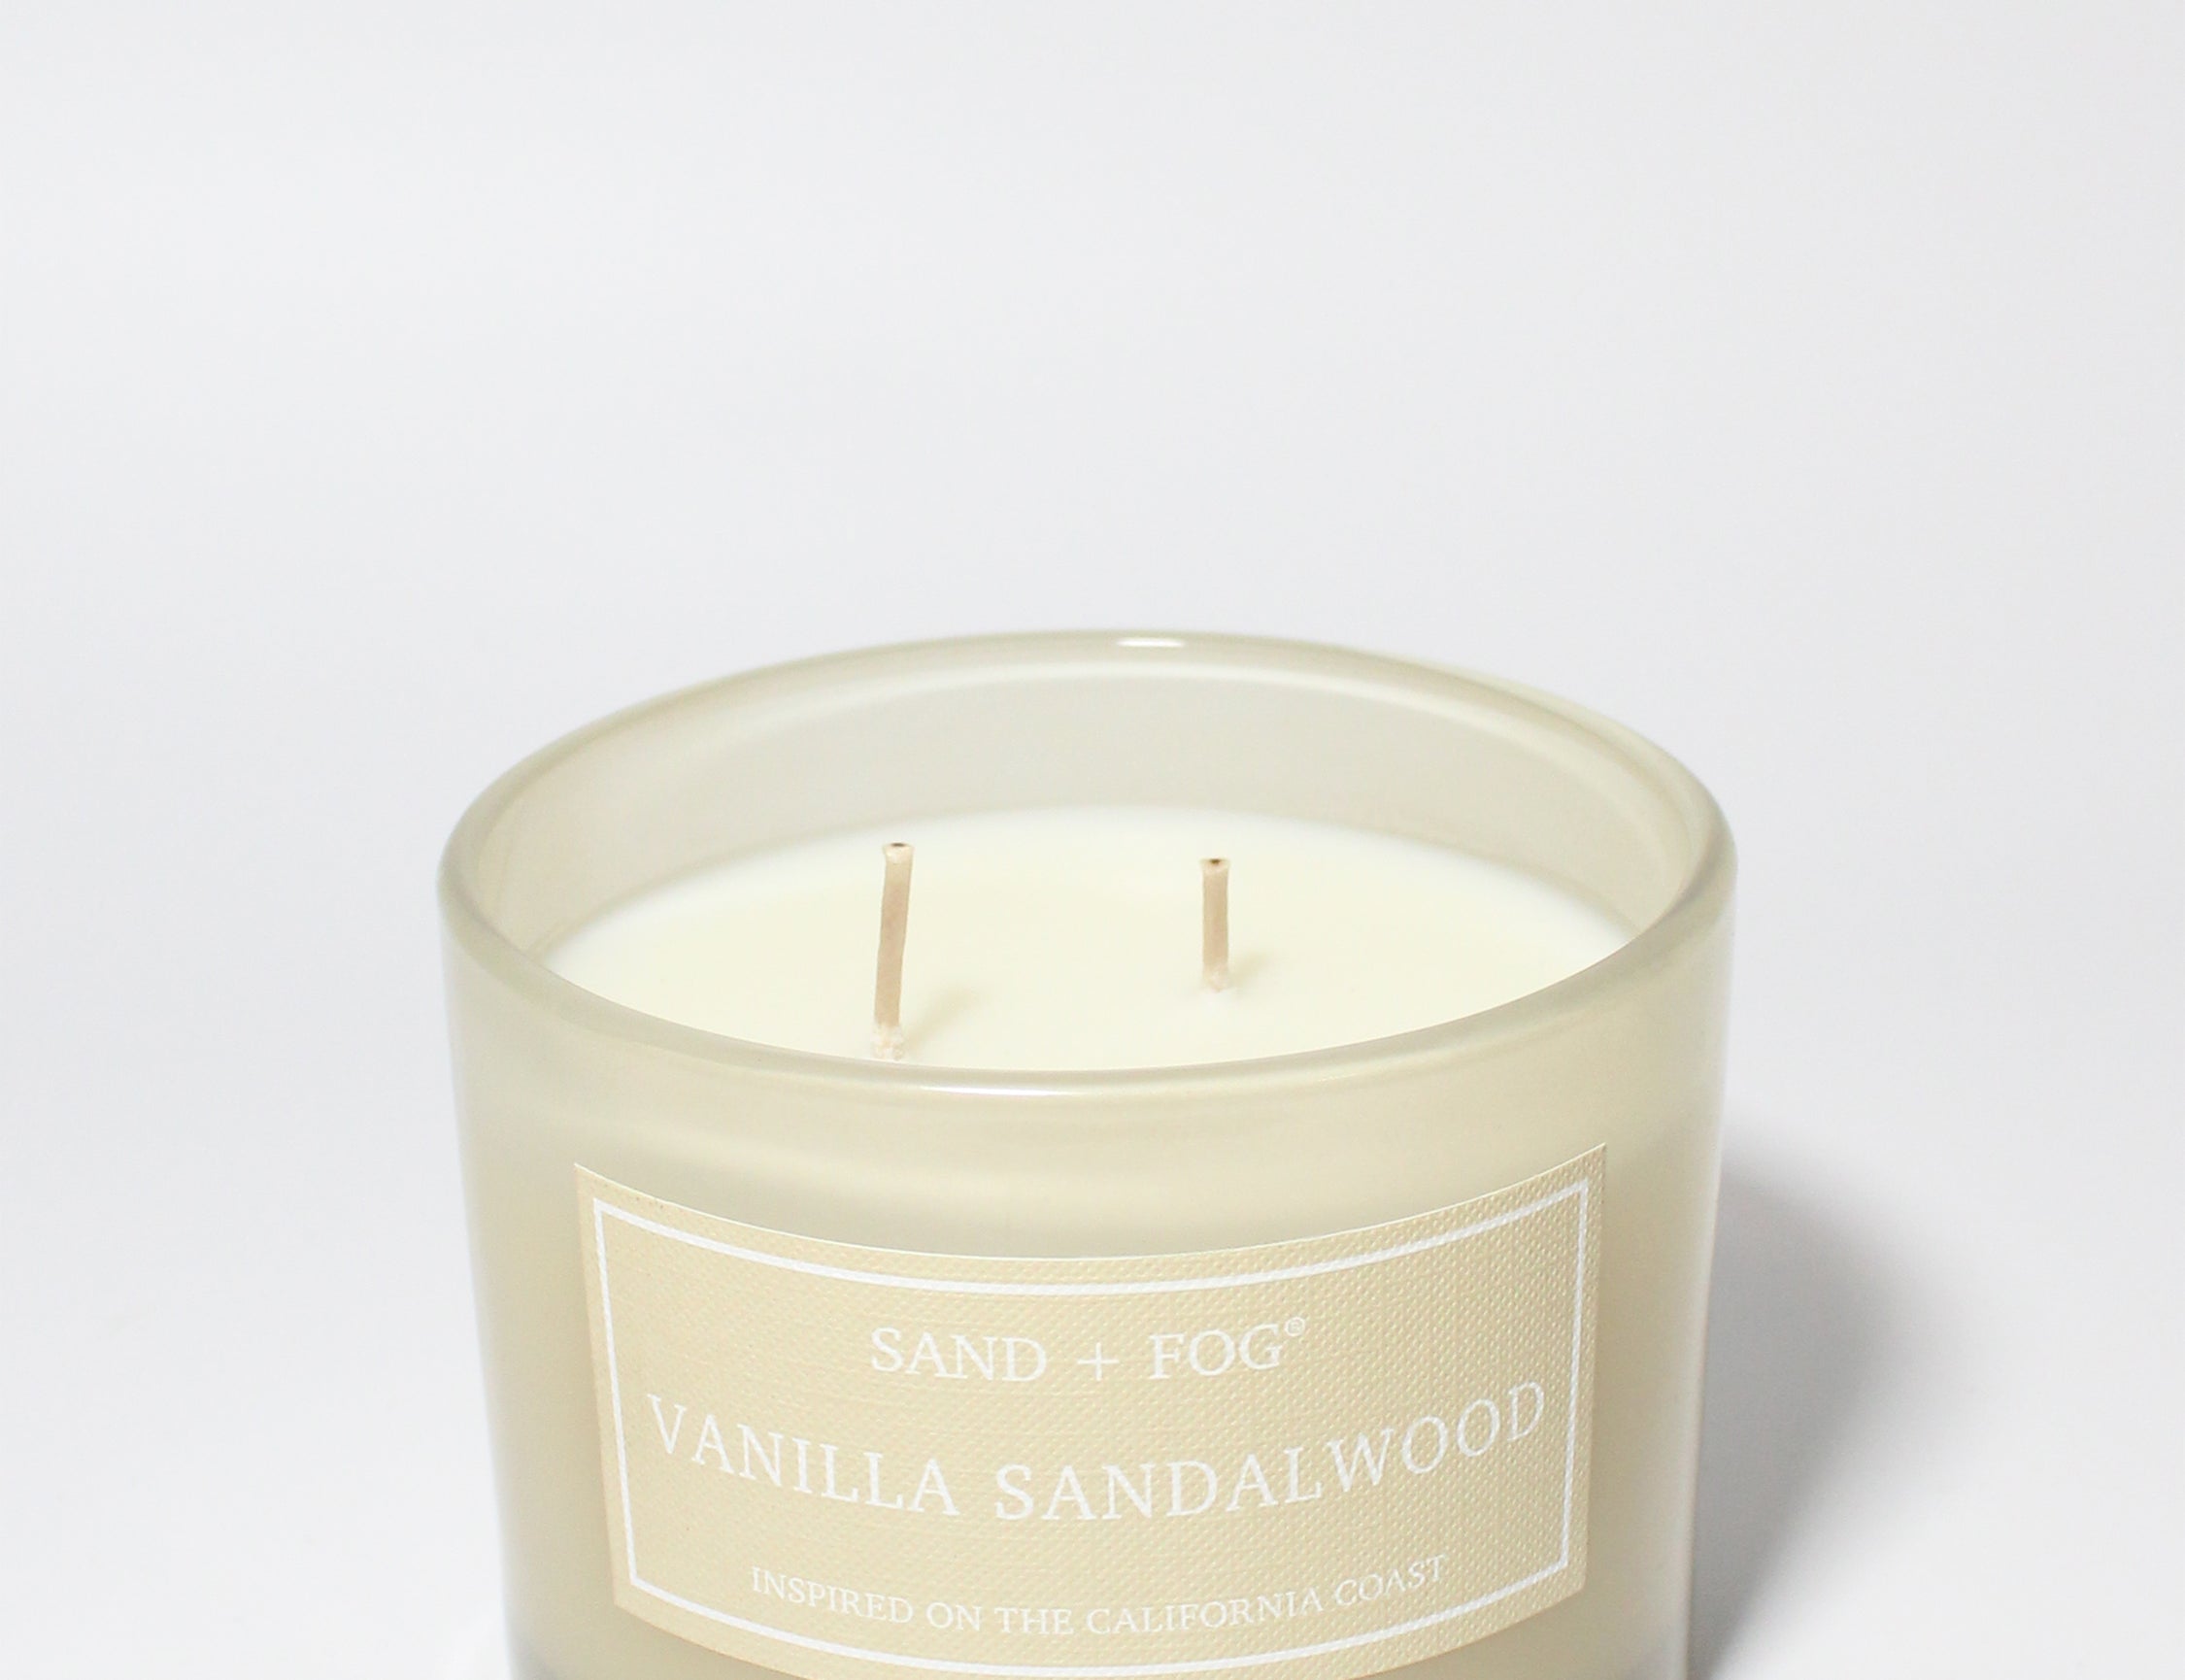 Vanilla Sandalwood 12 oz scented candle Flax vessel with wood lid